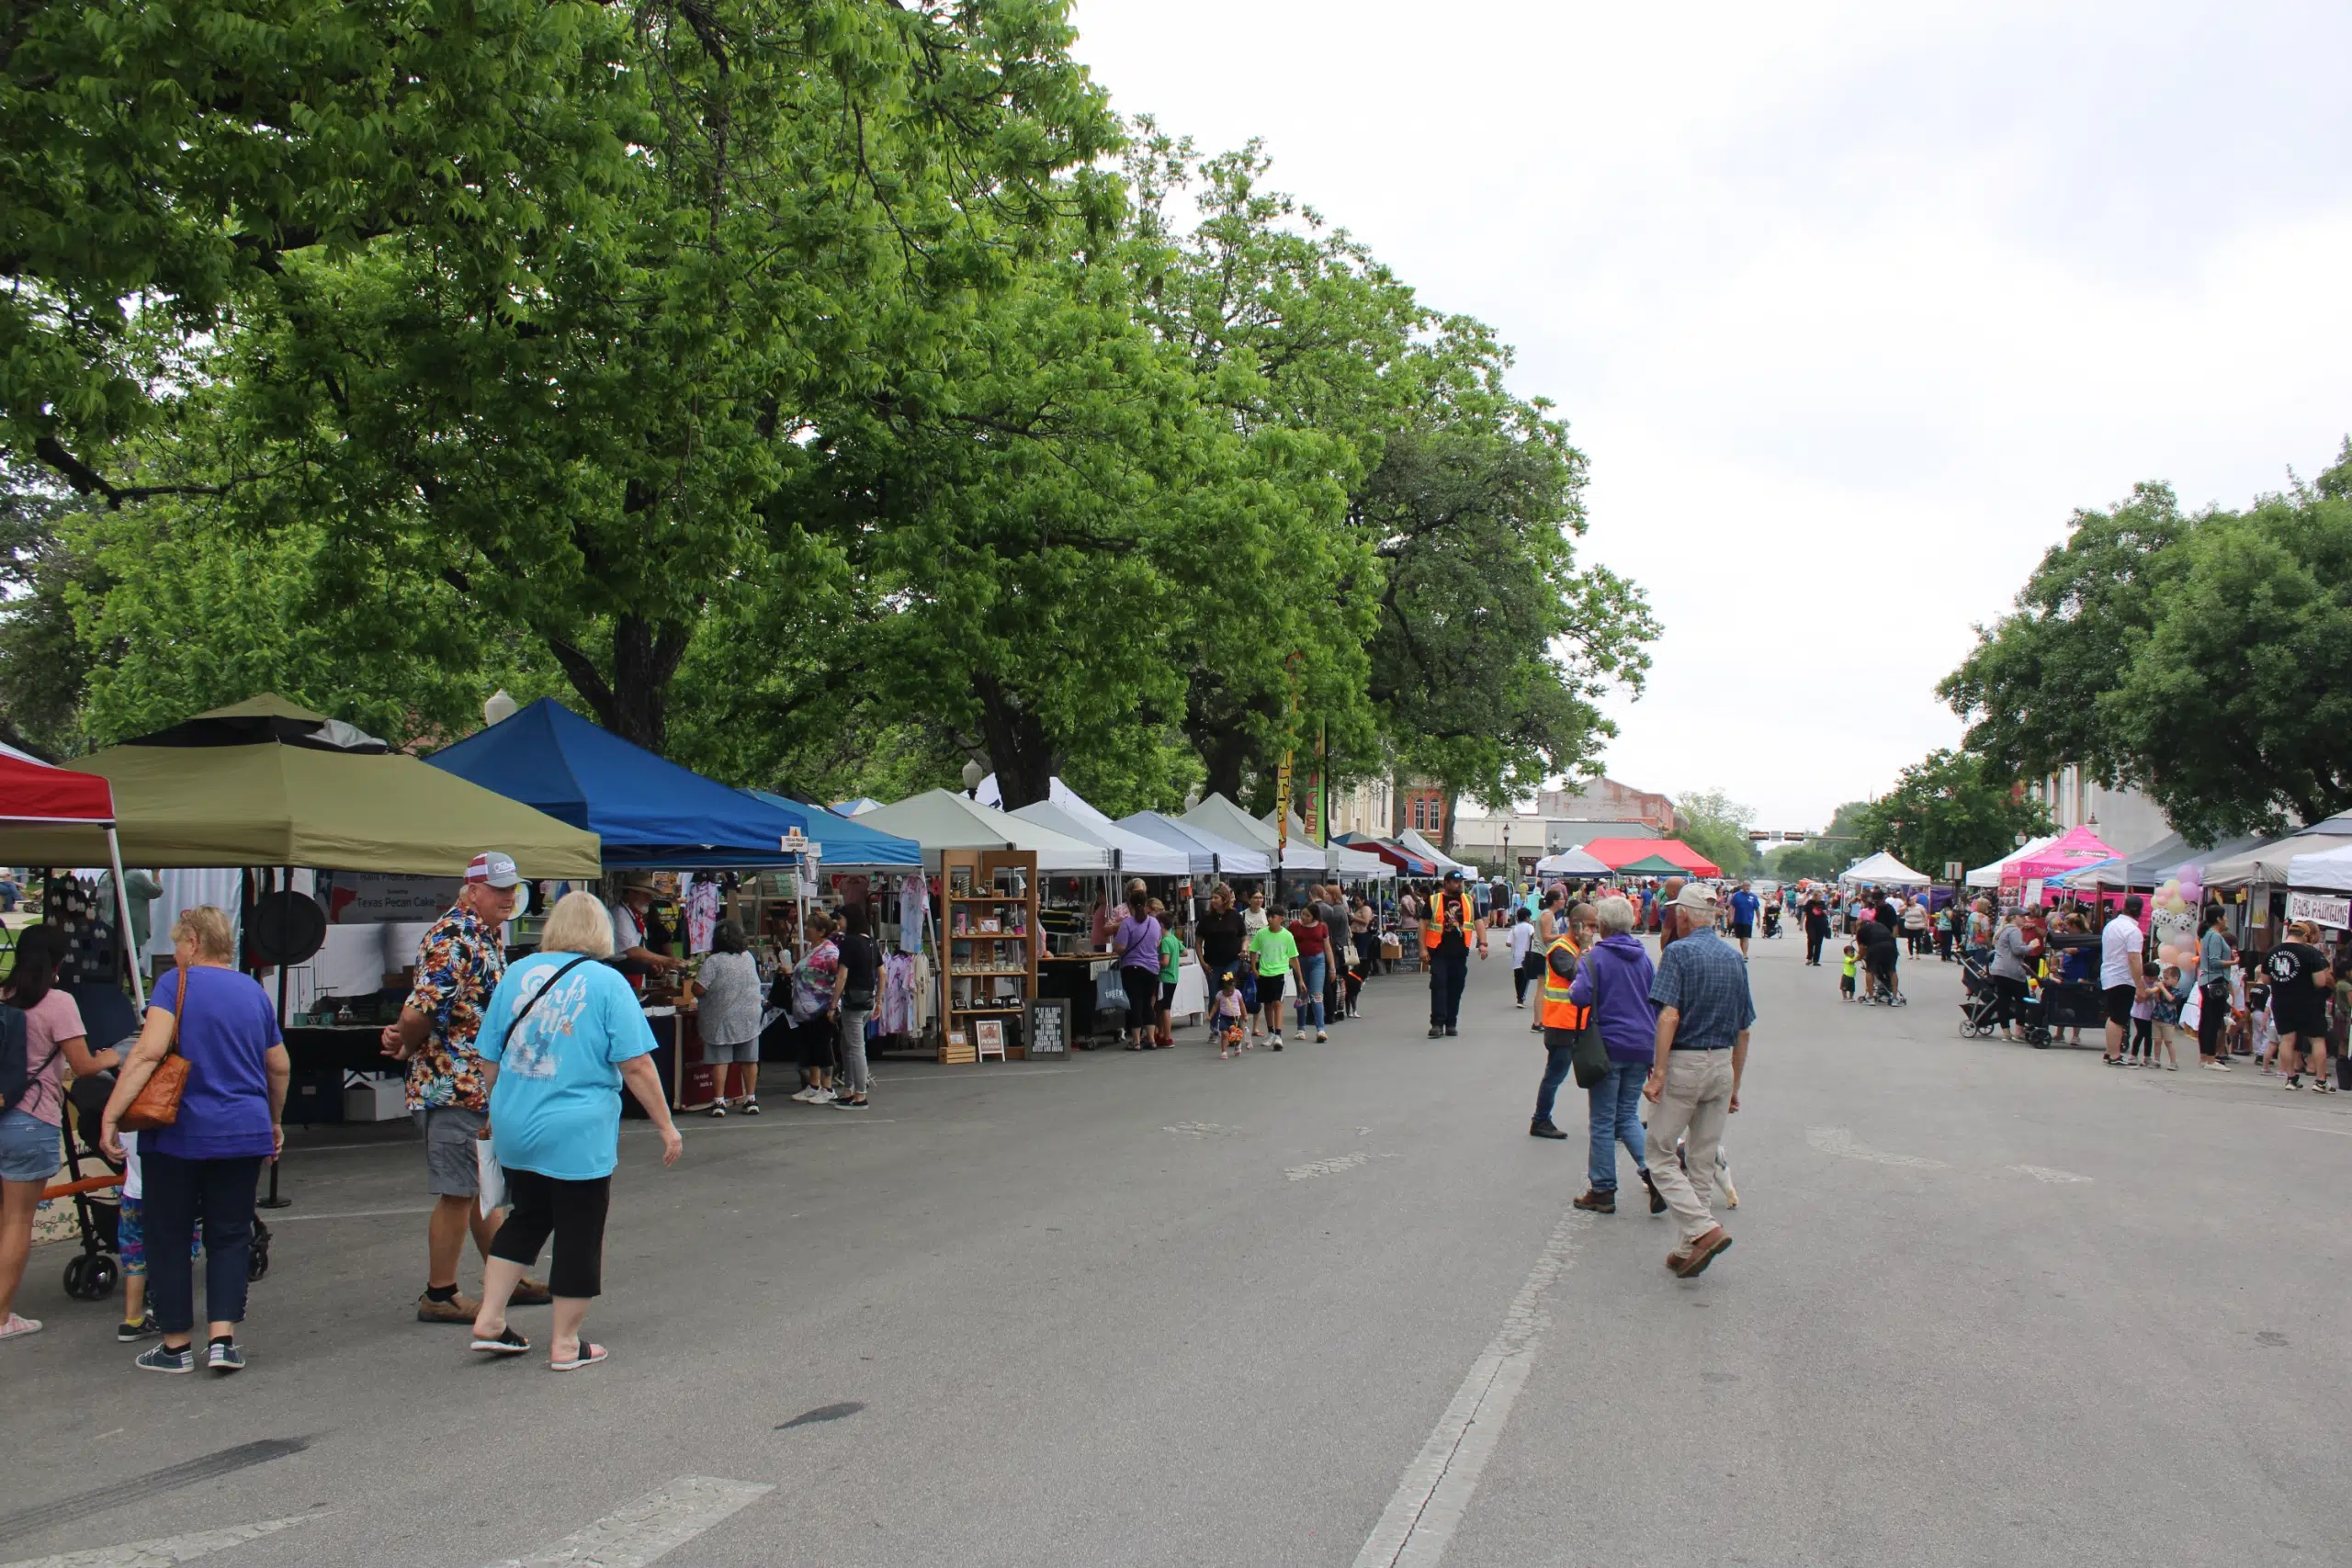 Vendor sign-up now underway for Seguin Main Street events